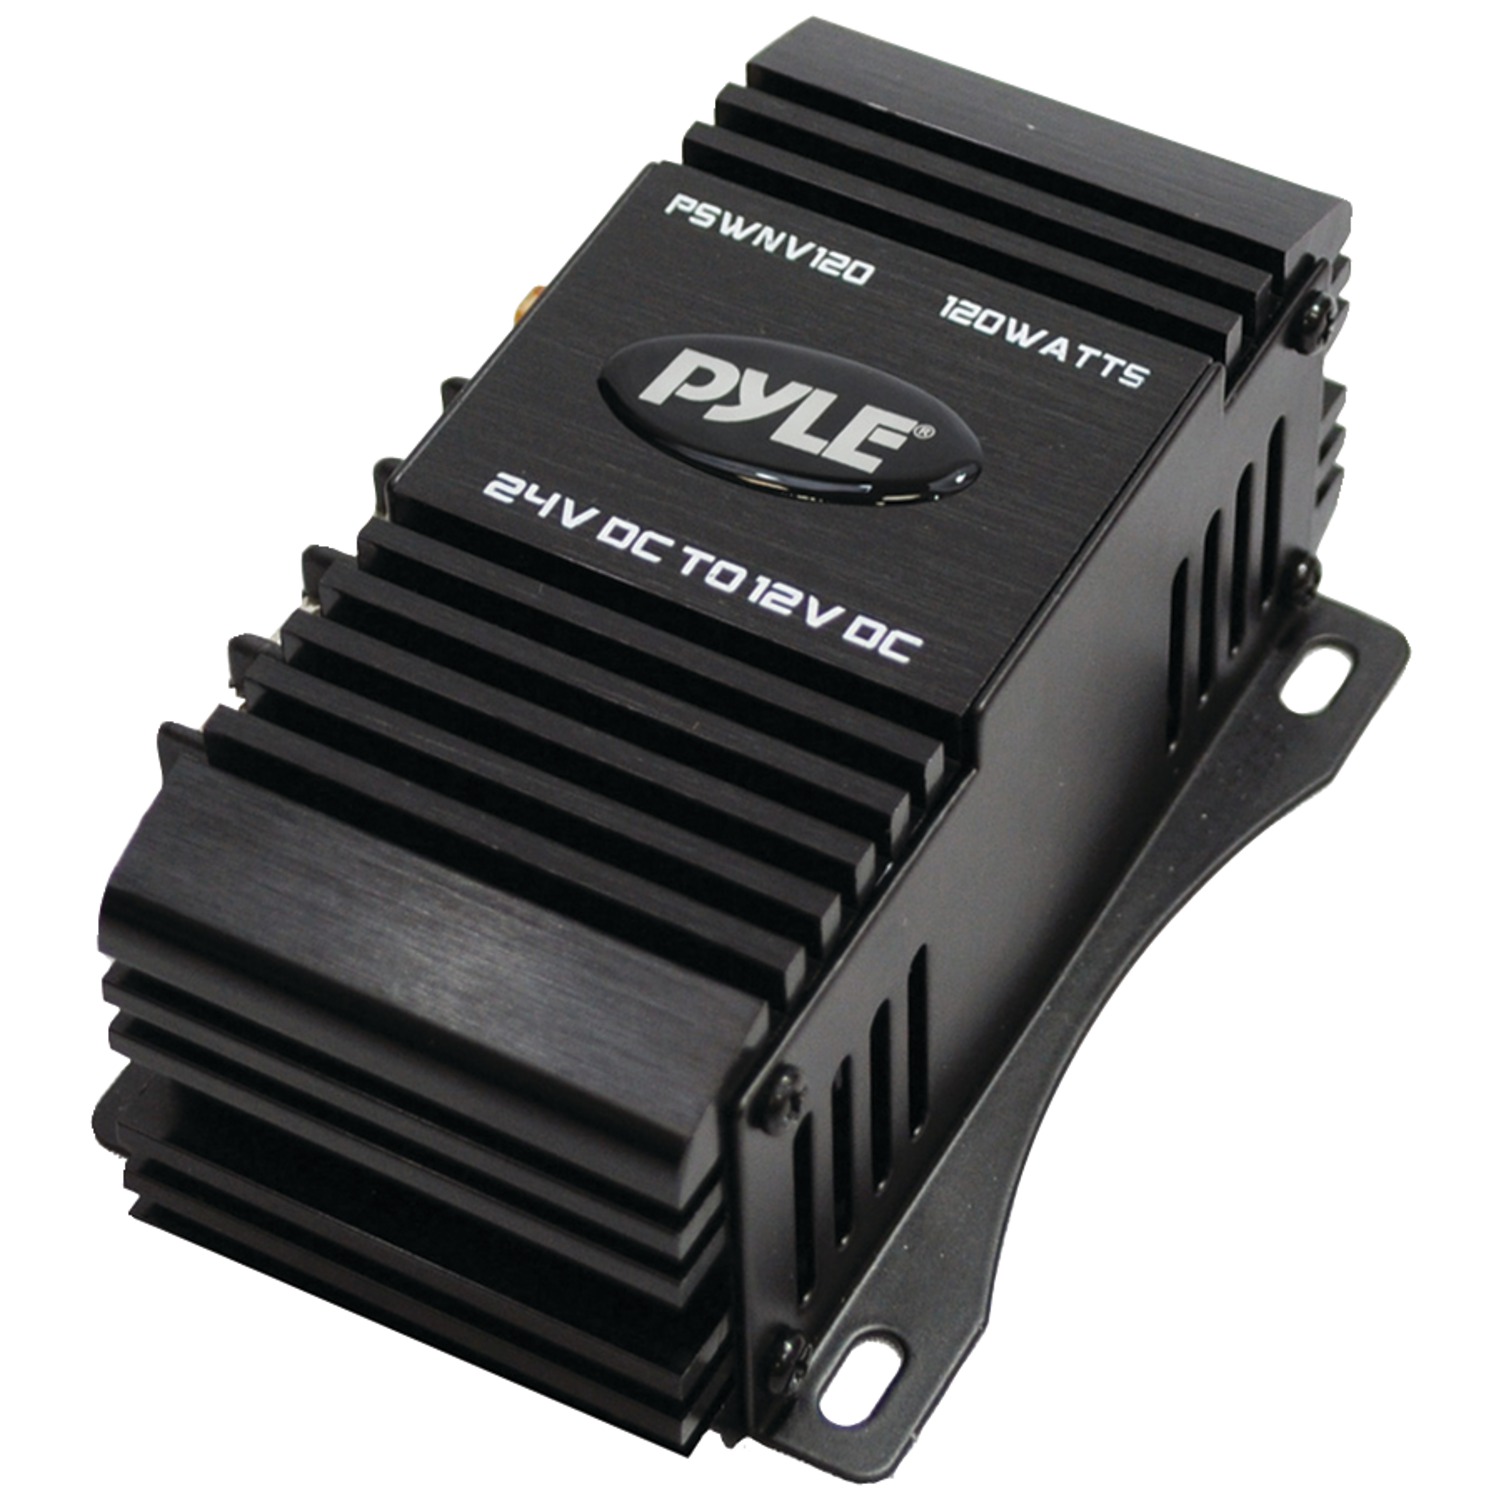 Pyle® Pswnv120 24-volt Dc To 12-volt Dc Step-down Converter With Pmw Technology (120 Watts) - image 2 of 3